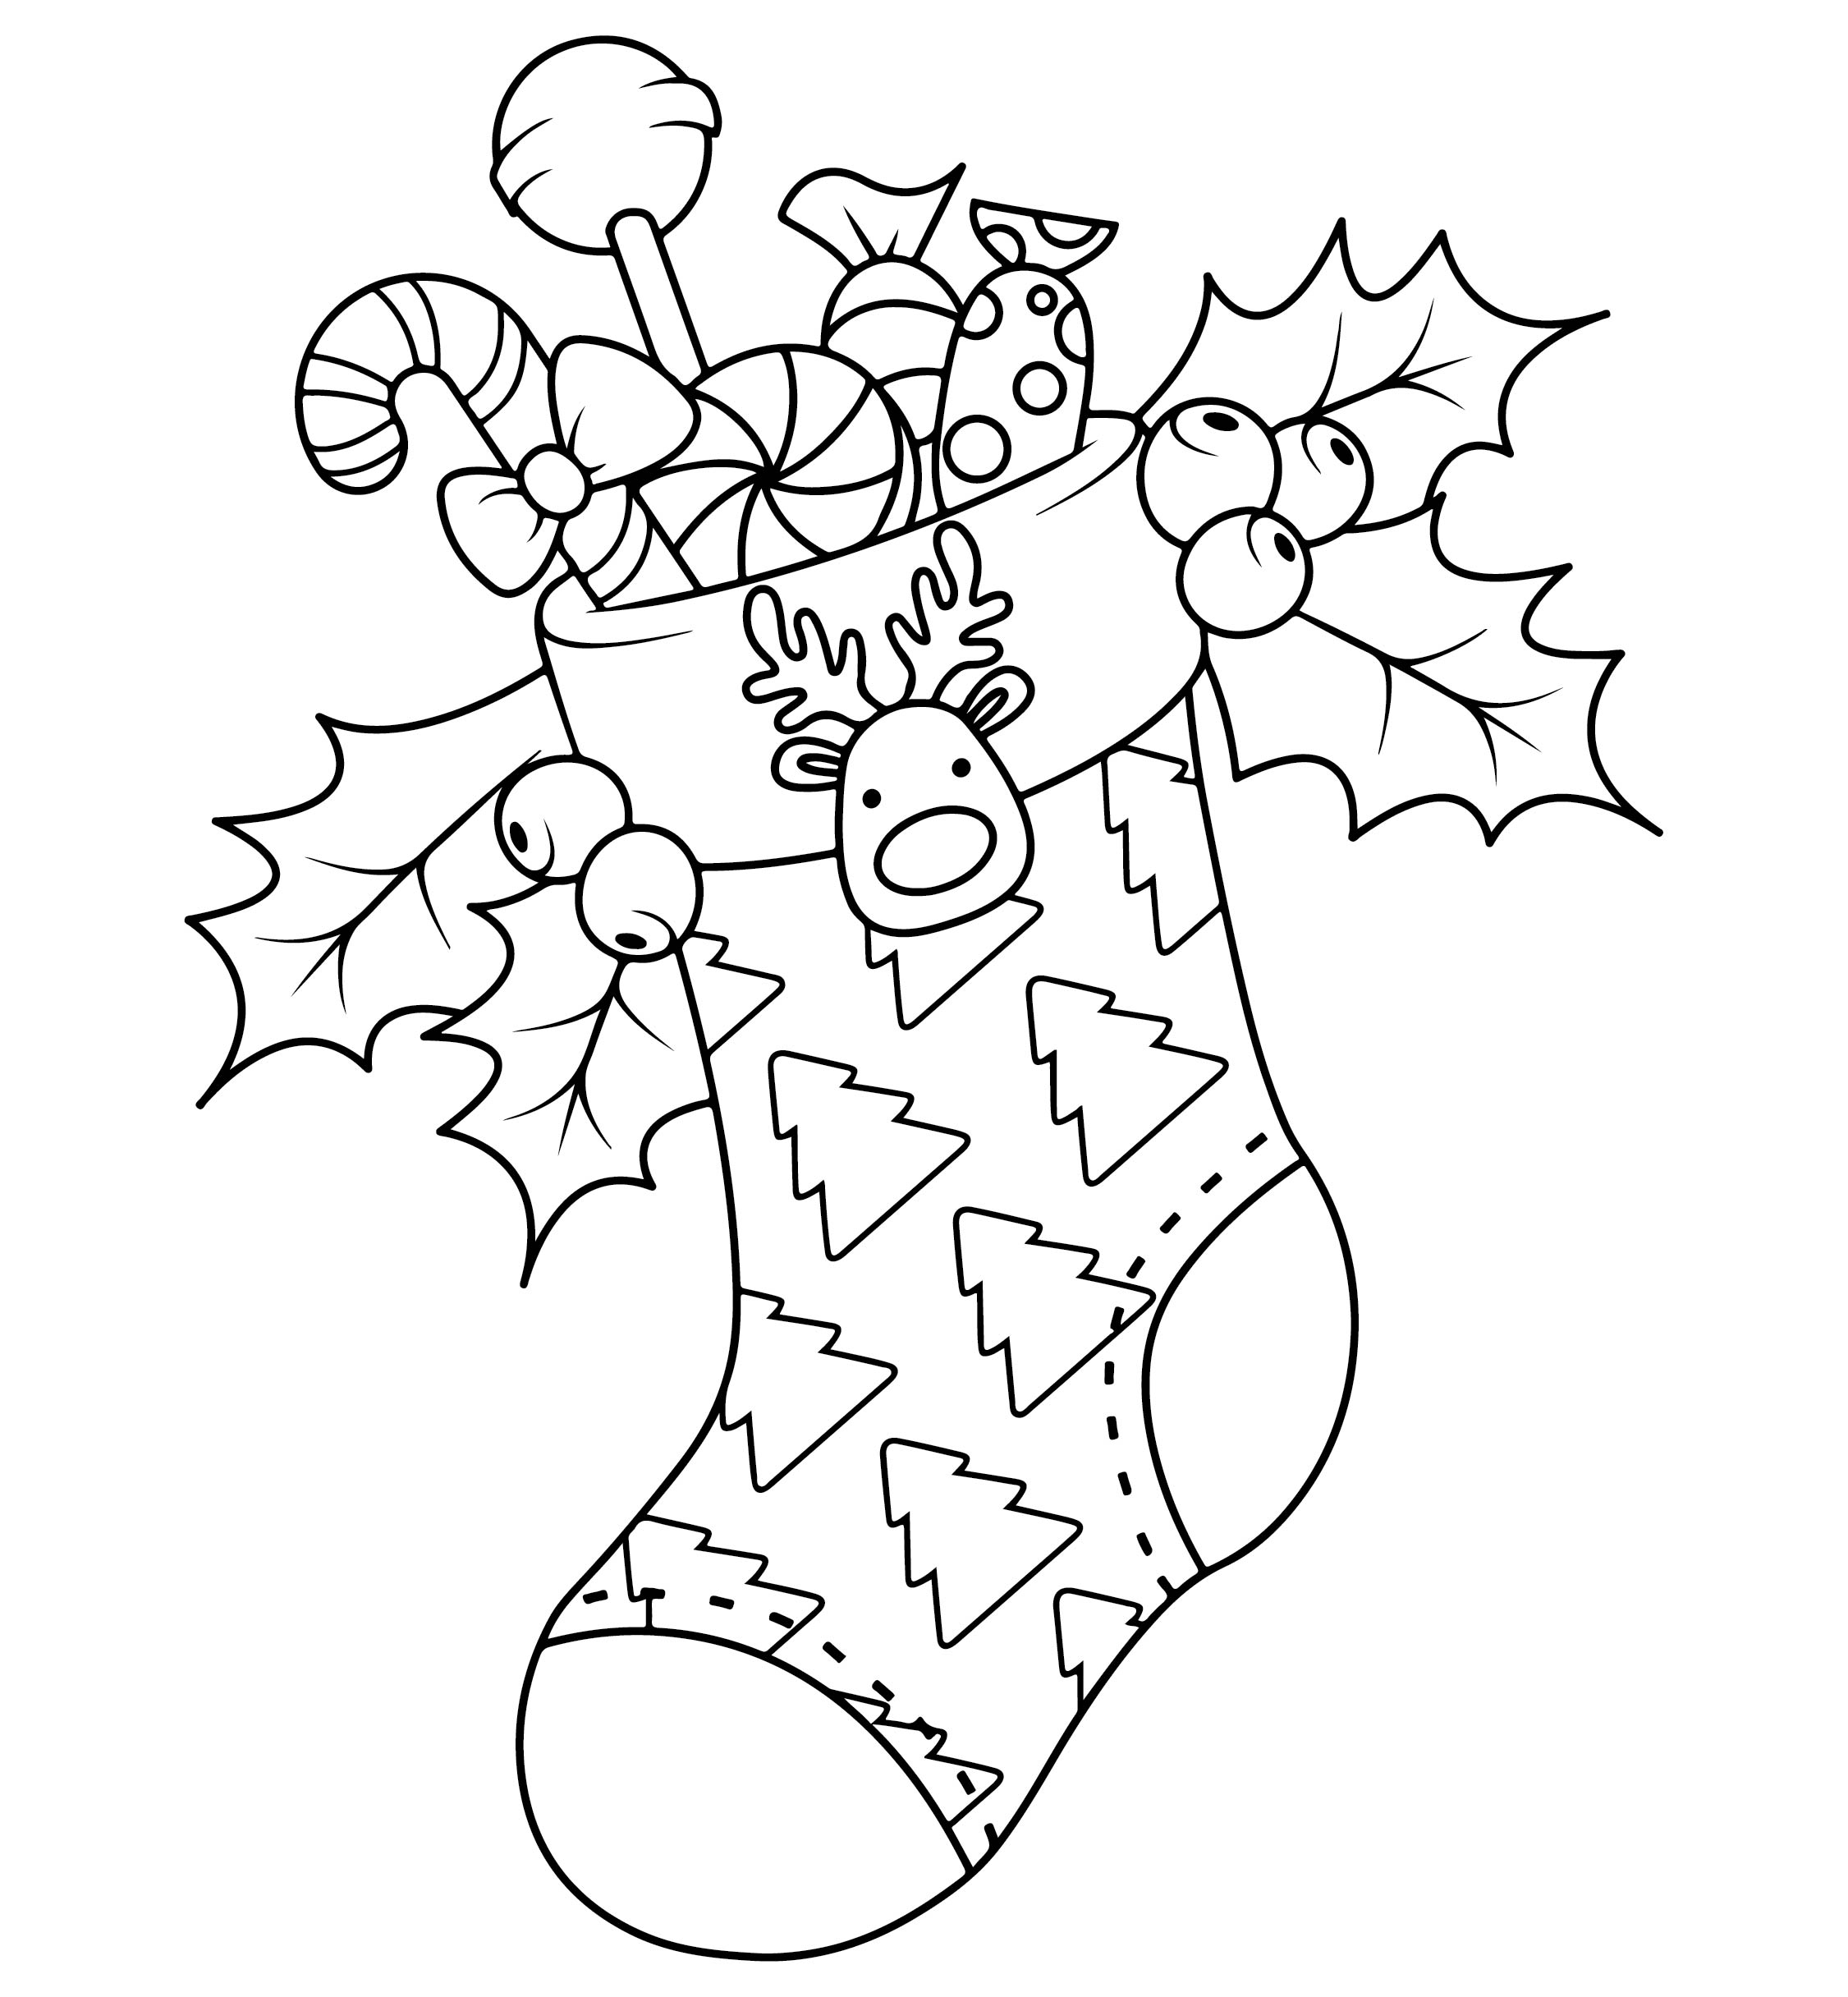 printable-stocking-coloring-pages-2023-calendar-printable